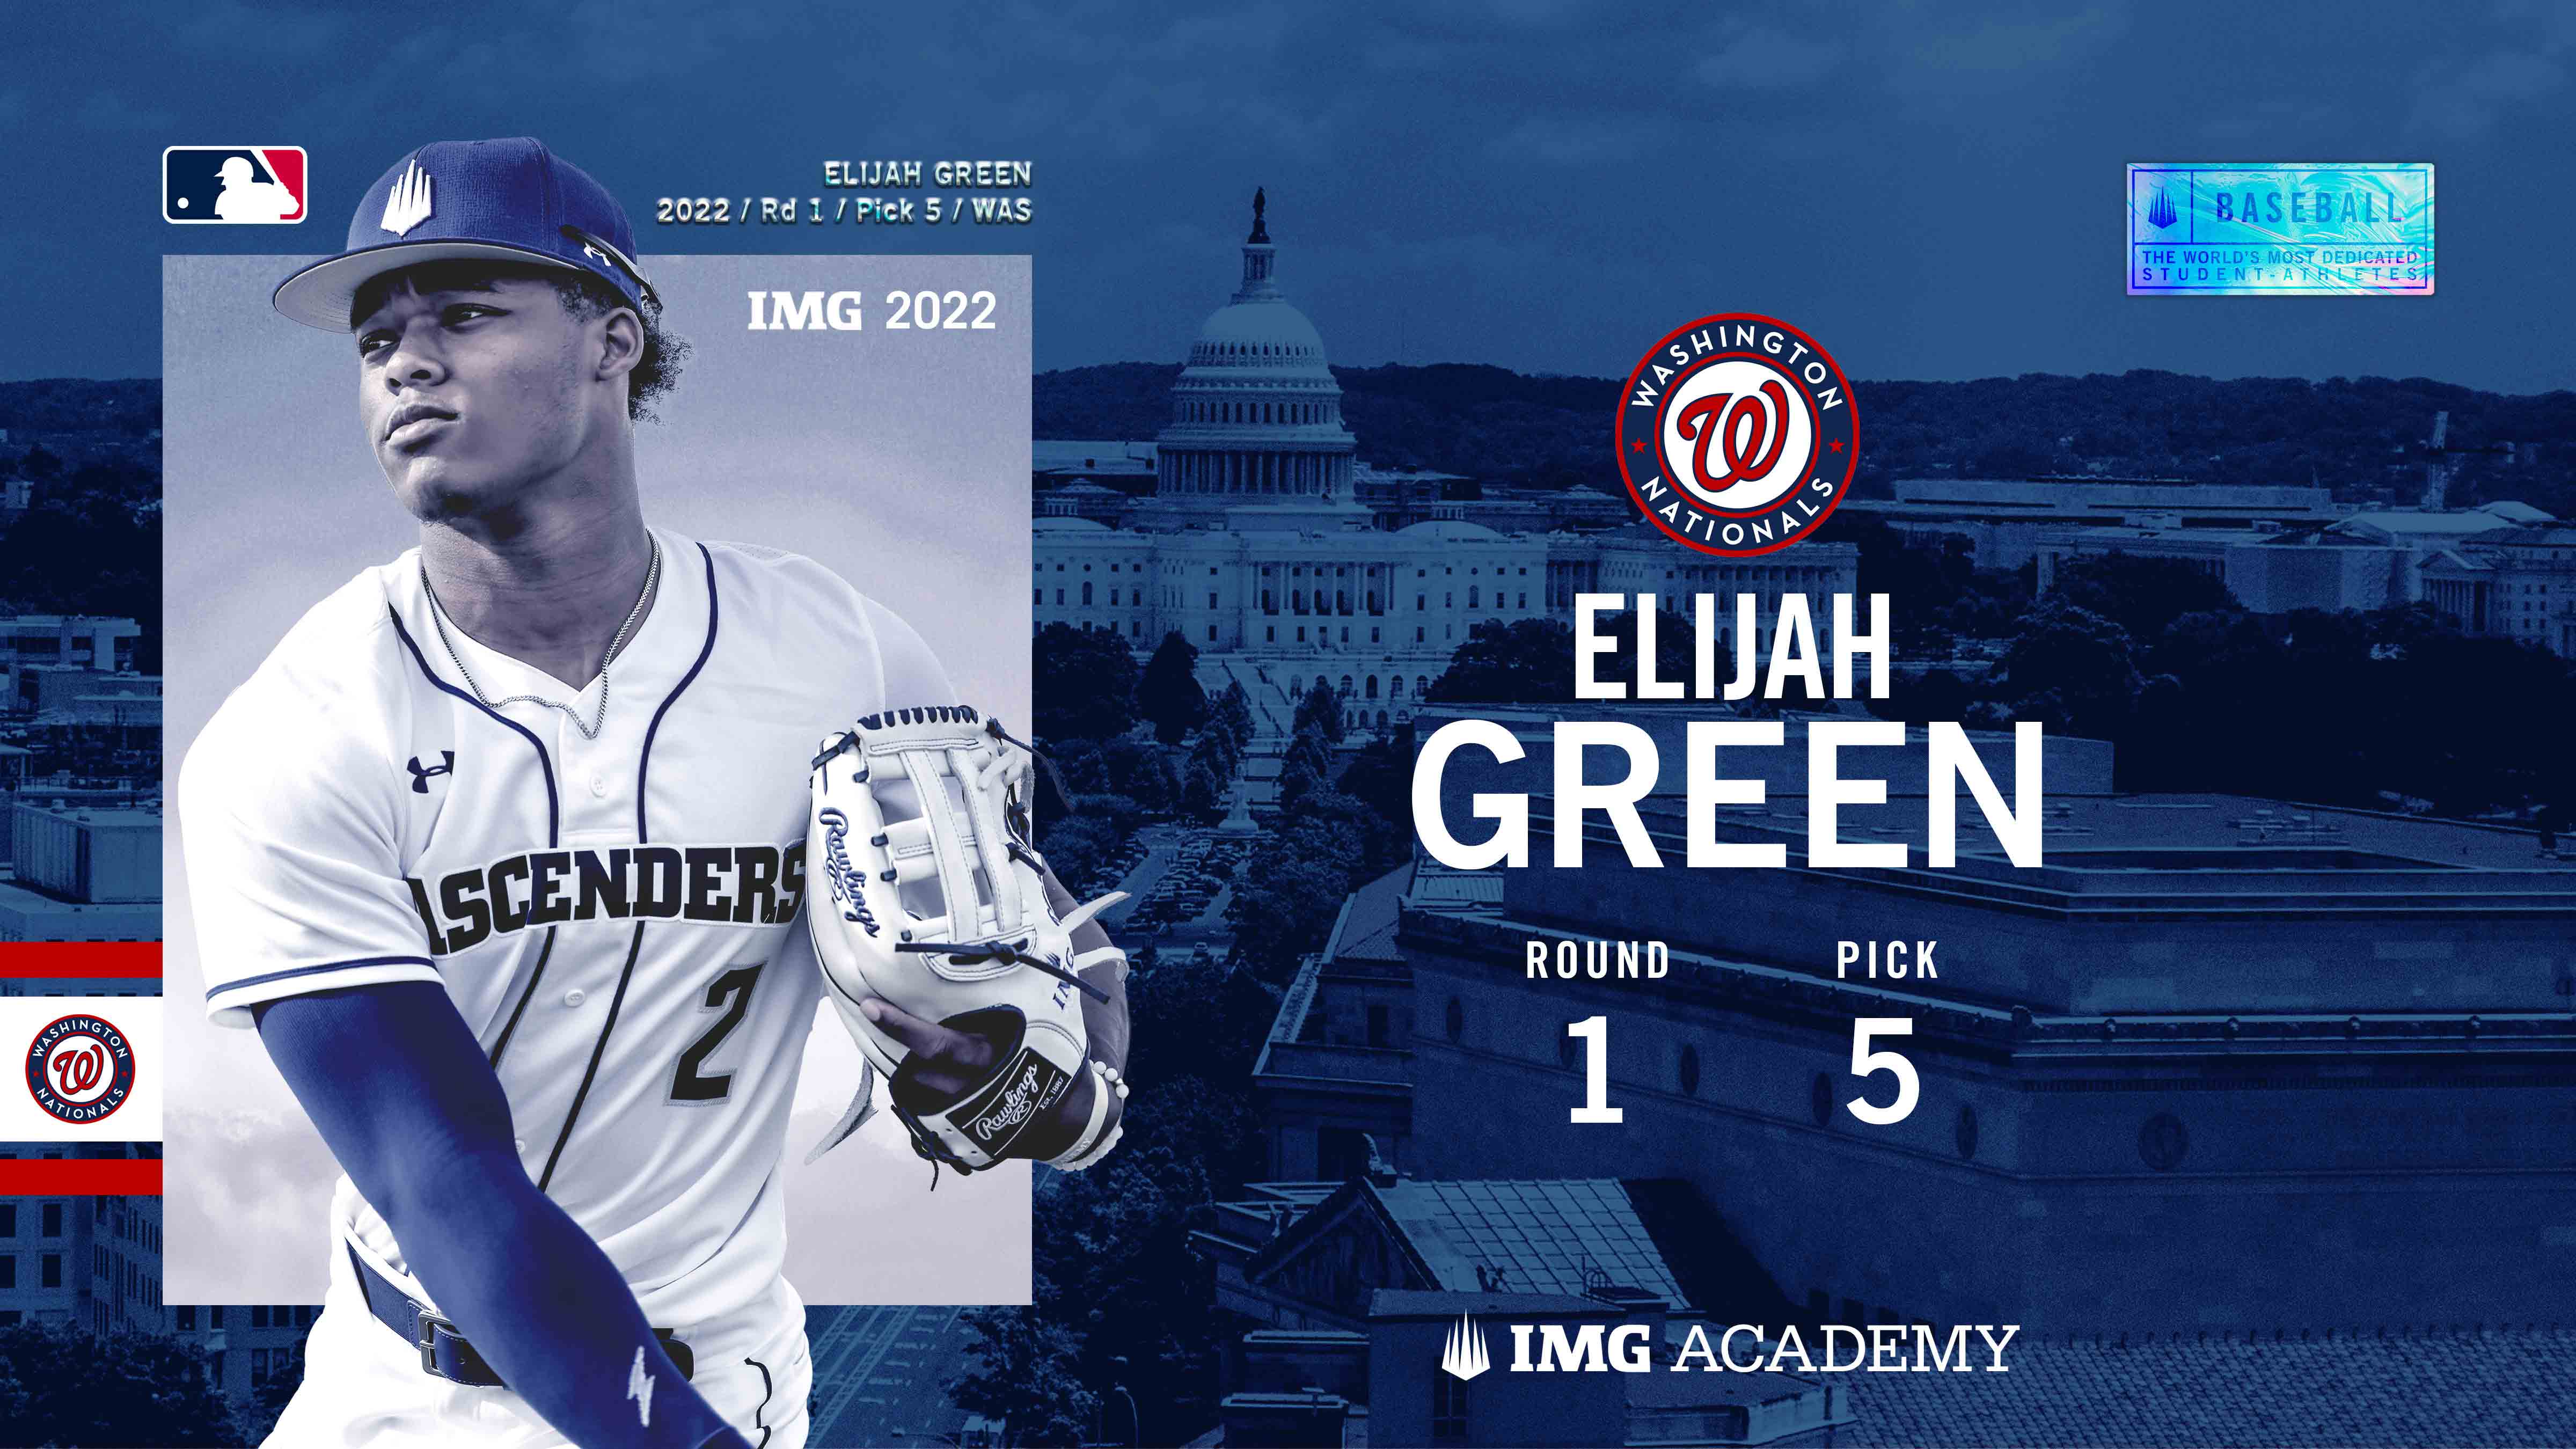 Four IMG Academy Student-Athletes Selected in 2022 MLB Draft